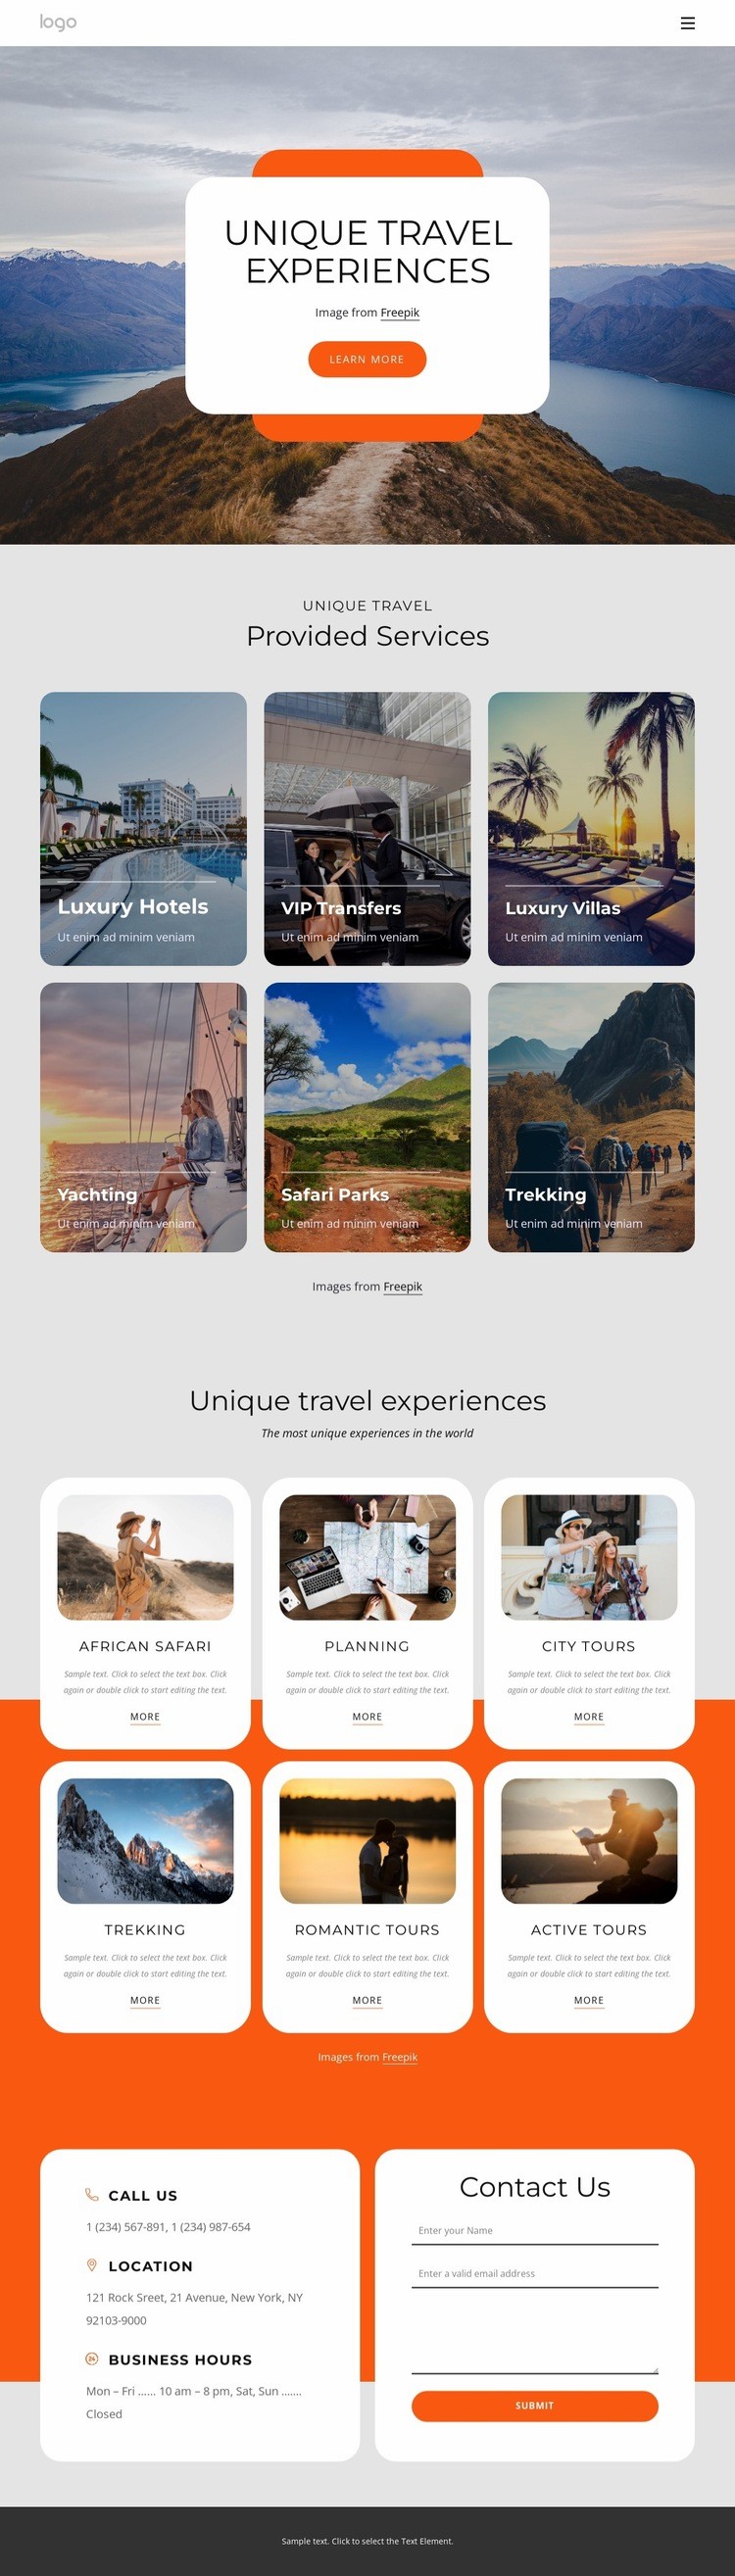 Luxury small-group travel experience Wix Template Alternative